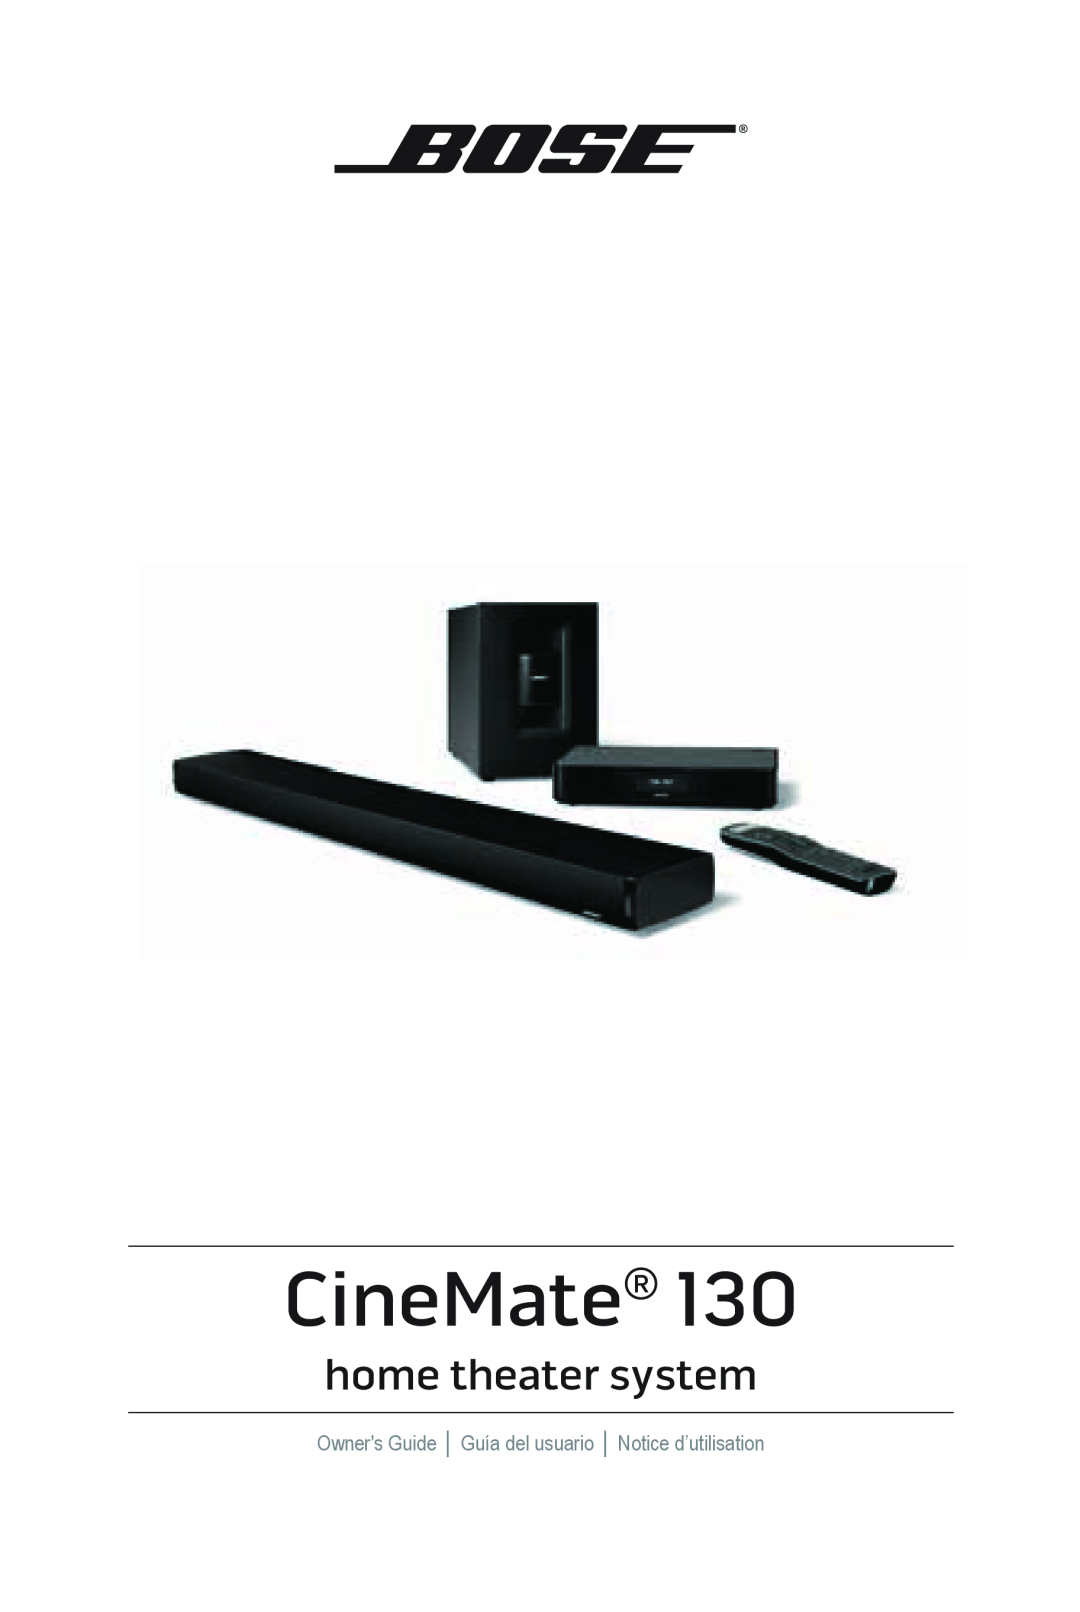 Bose cinemate manual CineMate, home theater system 